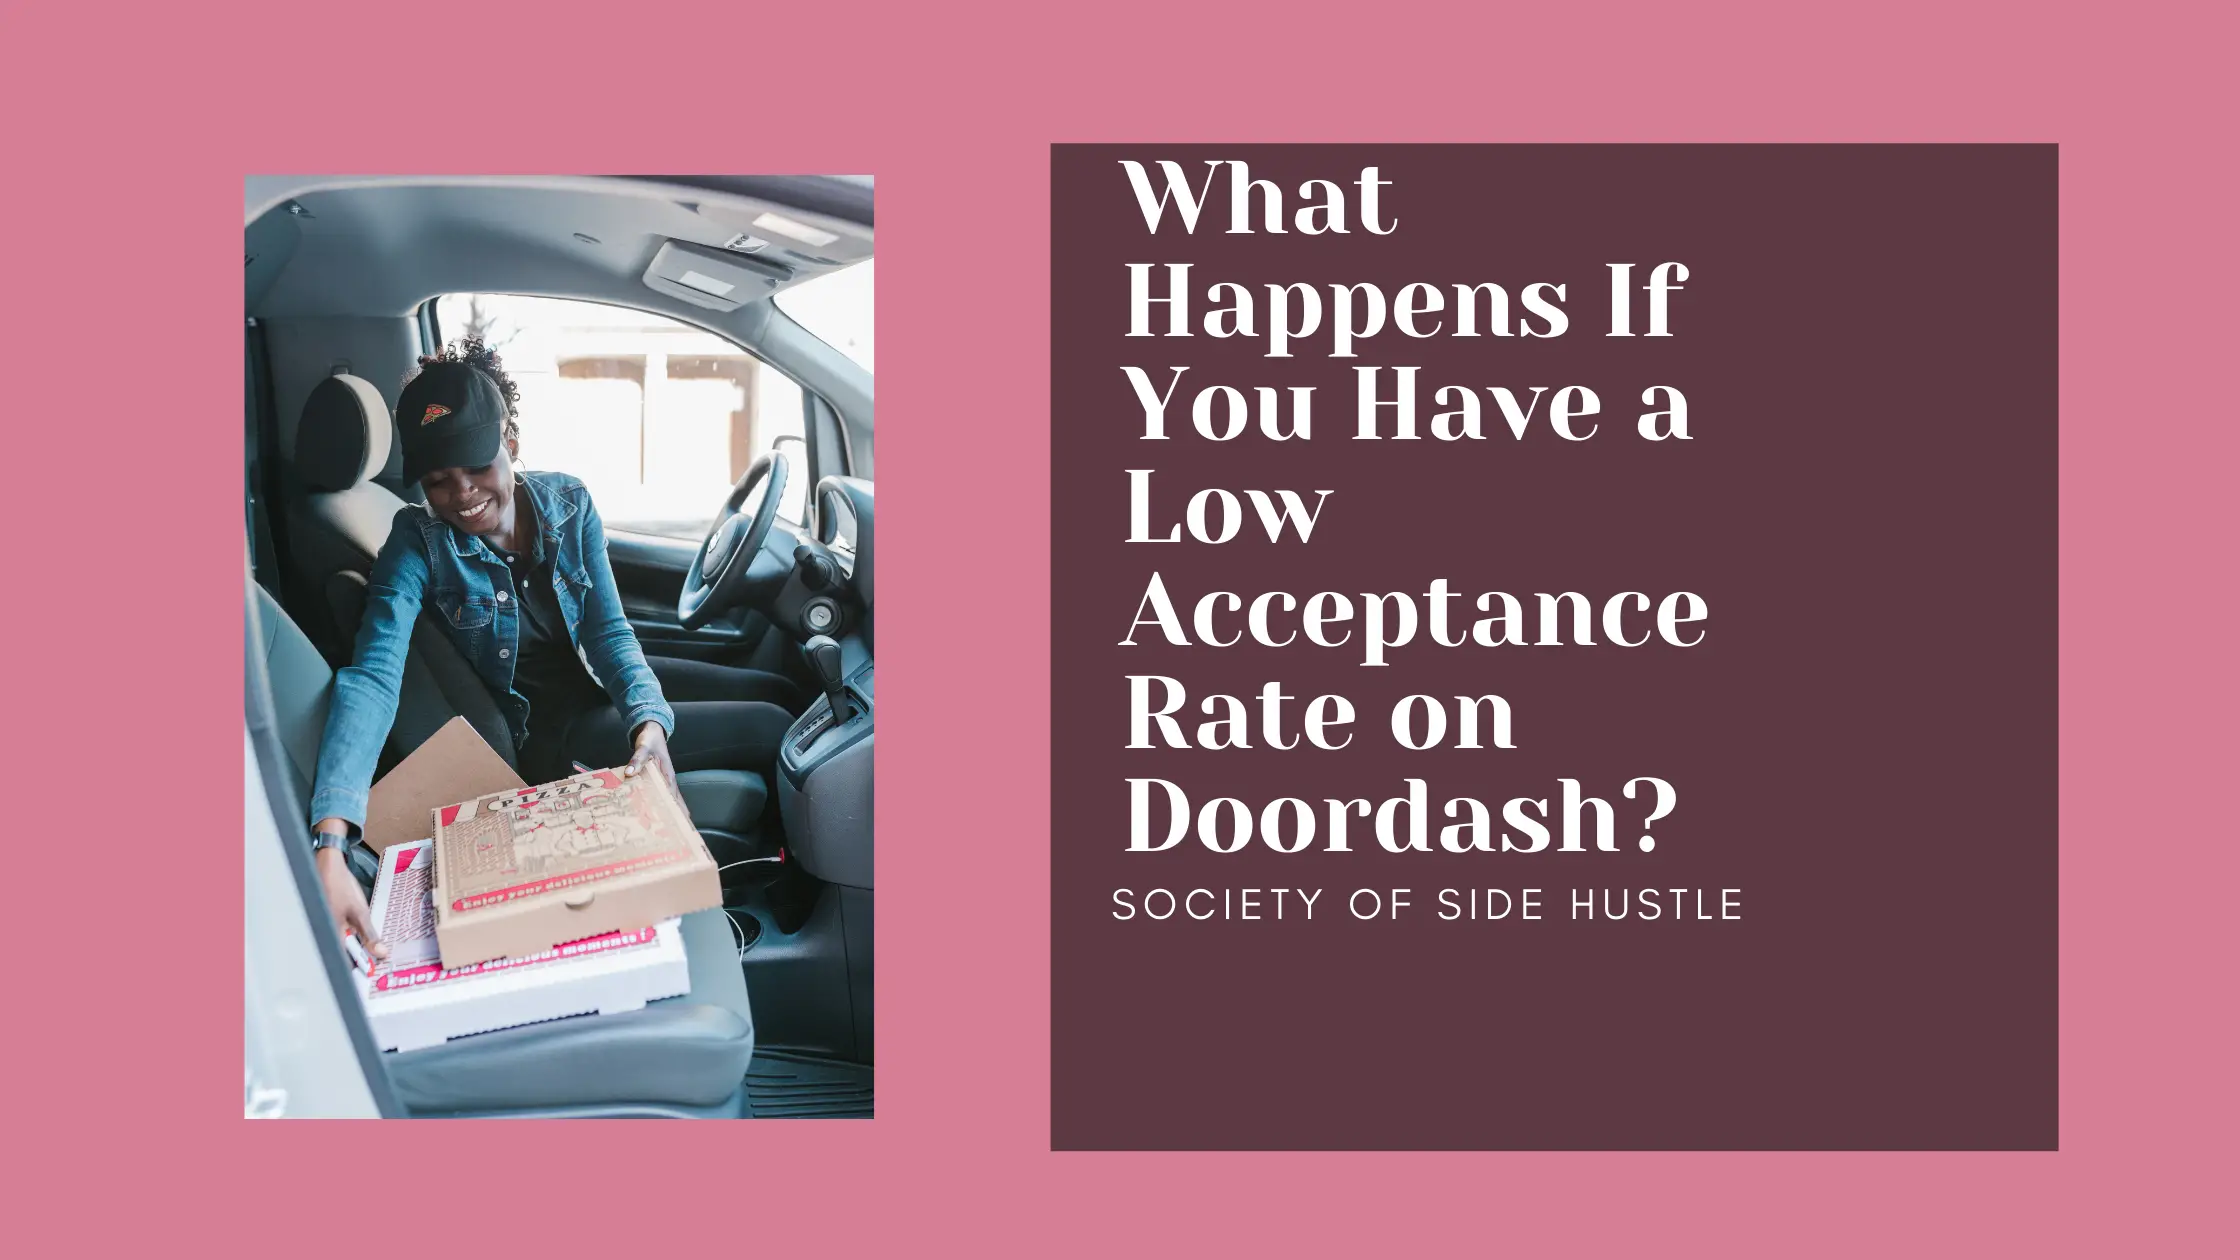 What Happens If You Have a Low Acceptance Rate on Doordash?